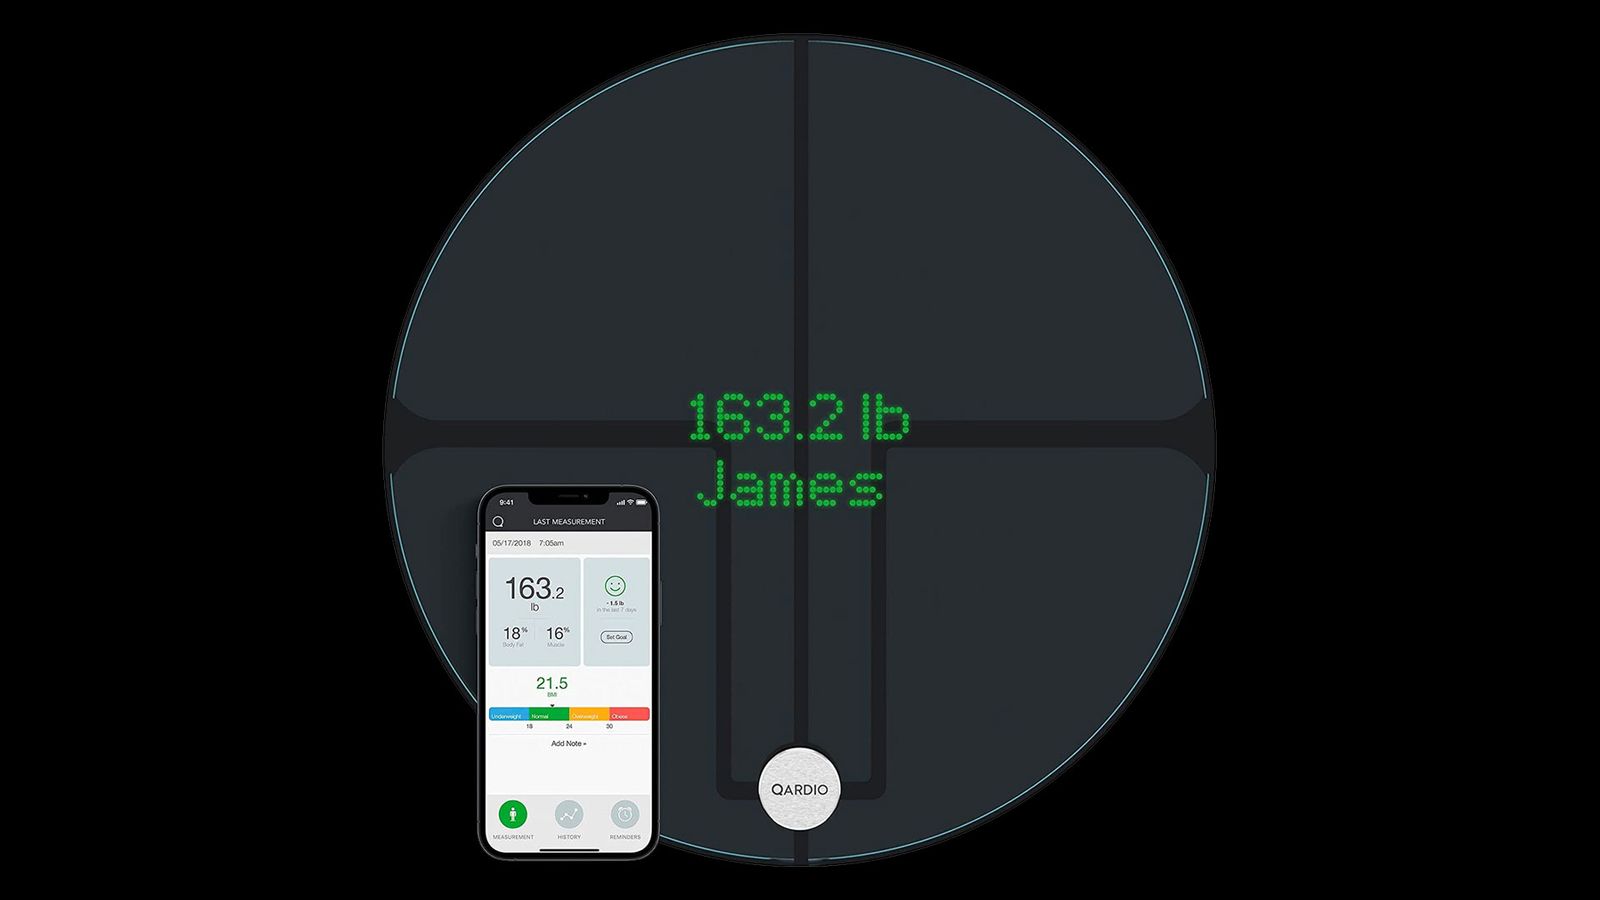 QardioBase 2 product image of a black, circular scale with an accompanying smartphone and the weight of someone called 'James' on the display.